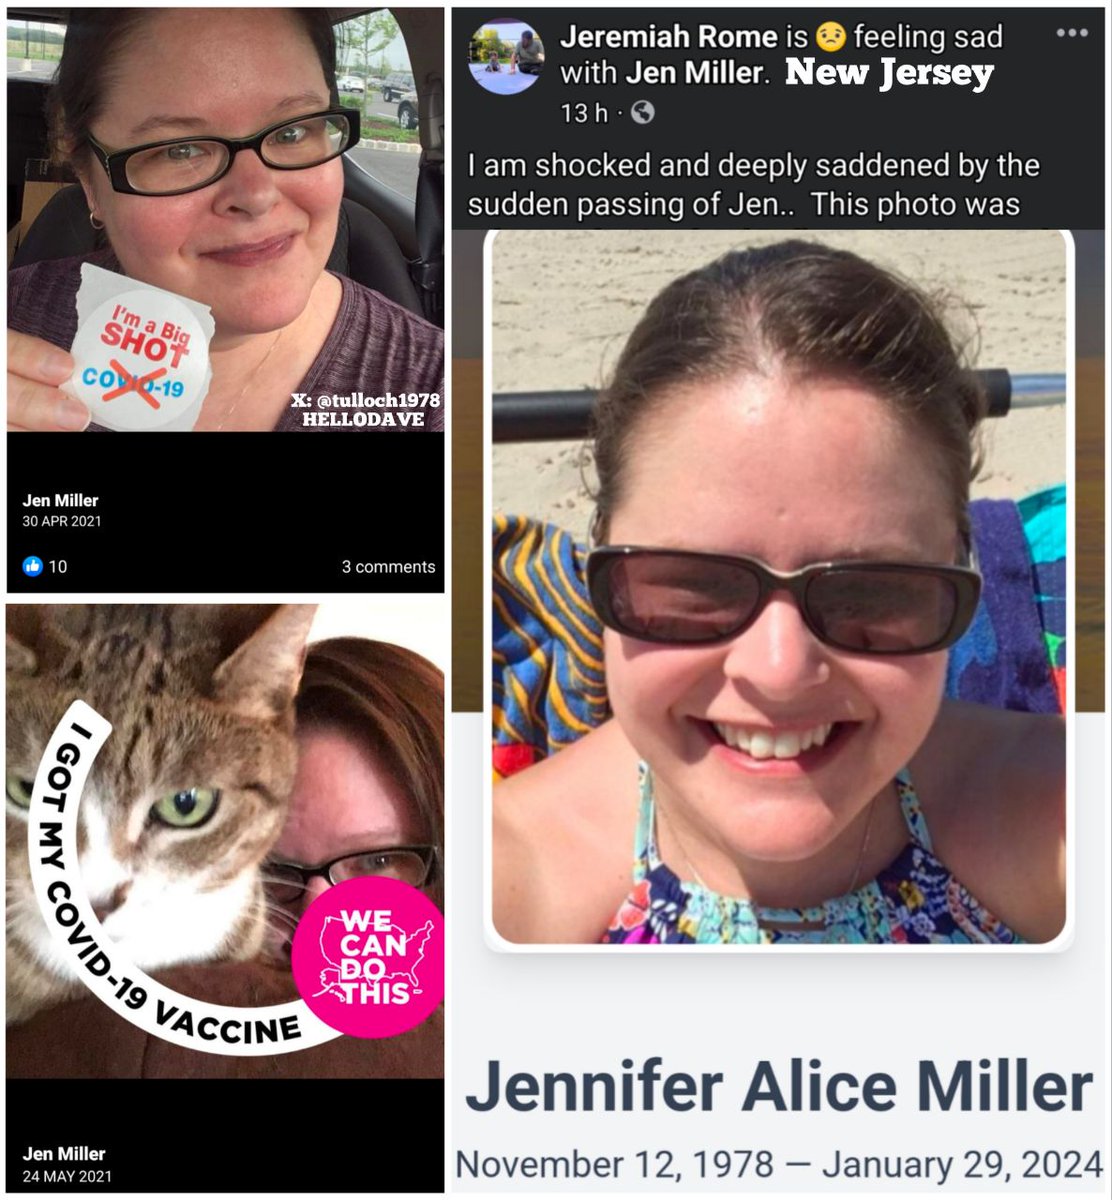 NJ - 45 year old Jennifer Alice Miller died suddenly on Jan.29, 2024.

She got a COVID-19 mRNA Vaccine with a sticker that said 'I'm a big SHOT, no COVID-19' on April 30, 2021.

These are so sad. These people had no idea they were being deliberately taken out.

#DiedSuddenly